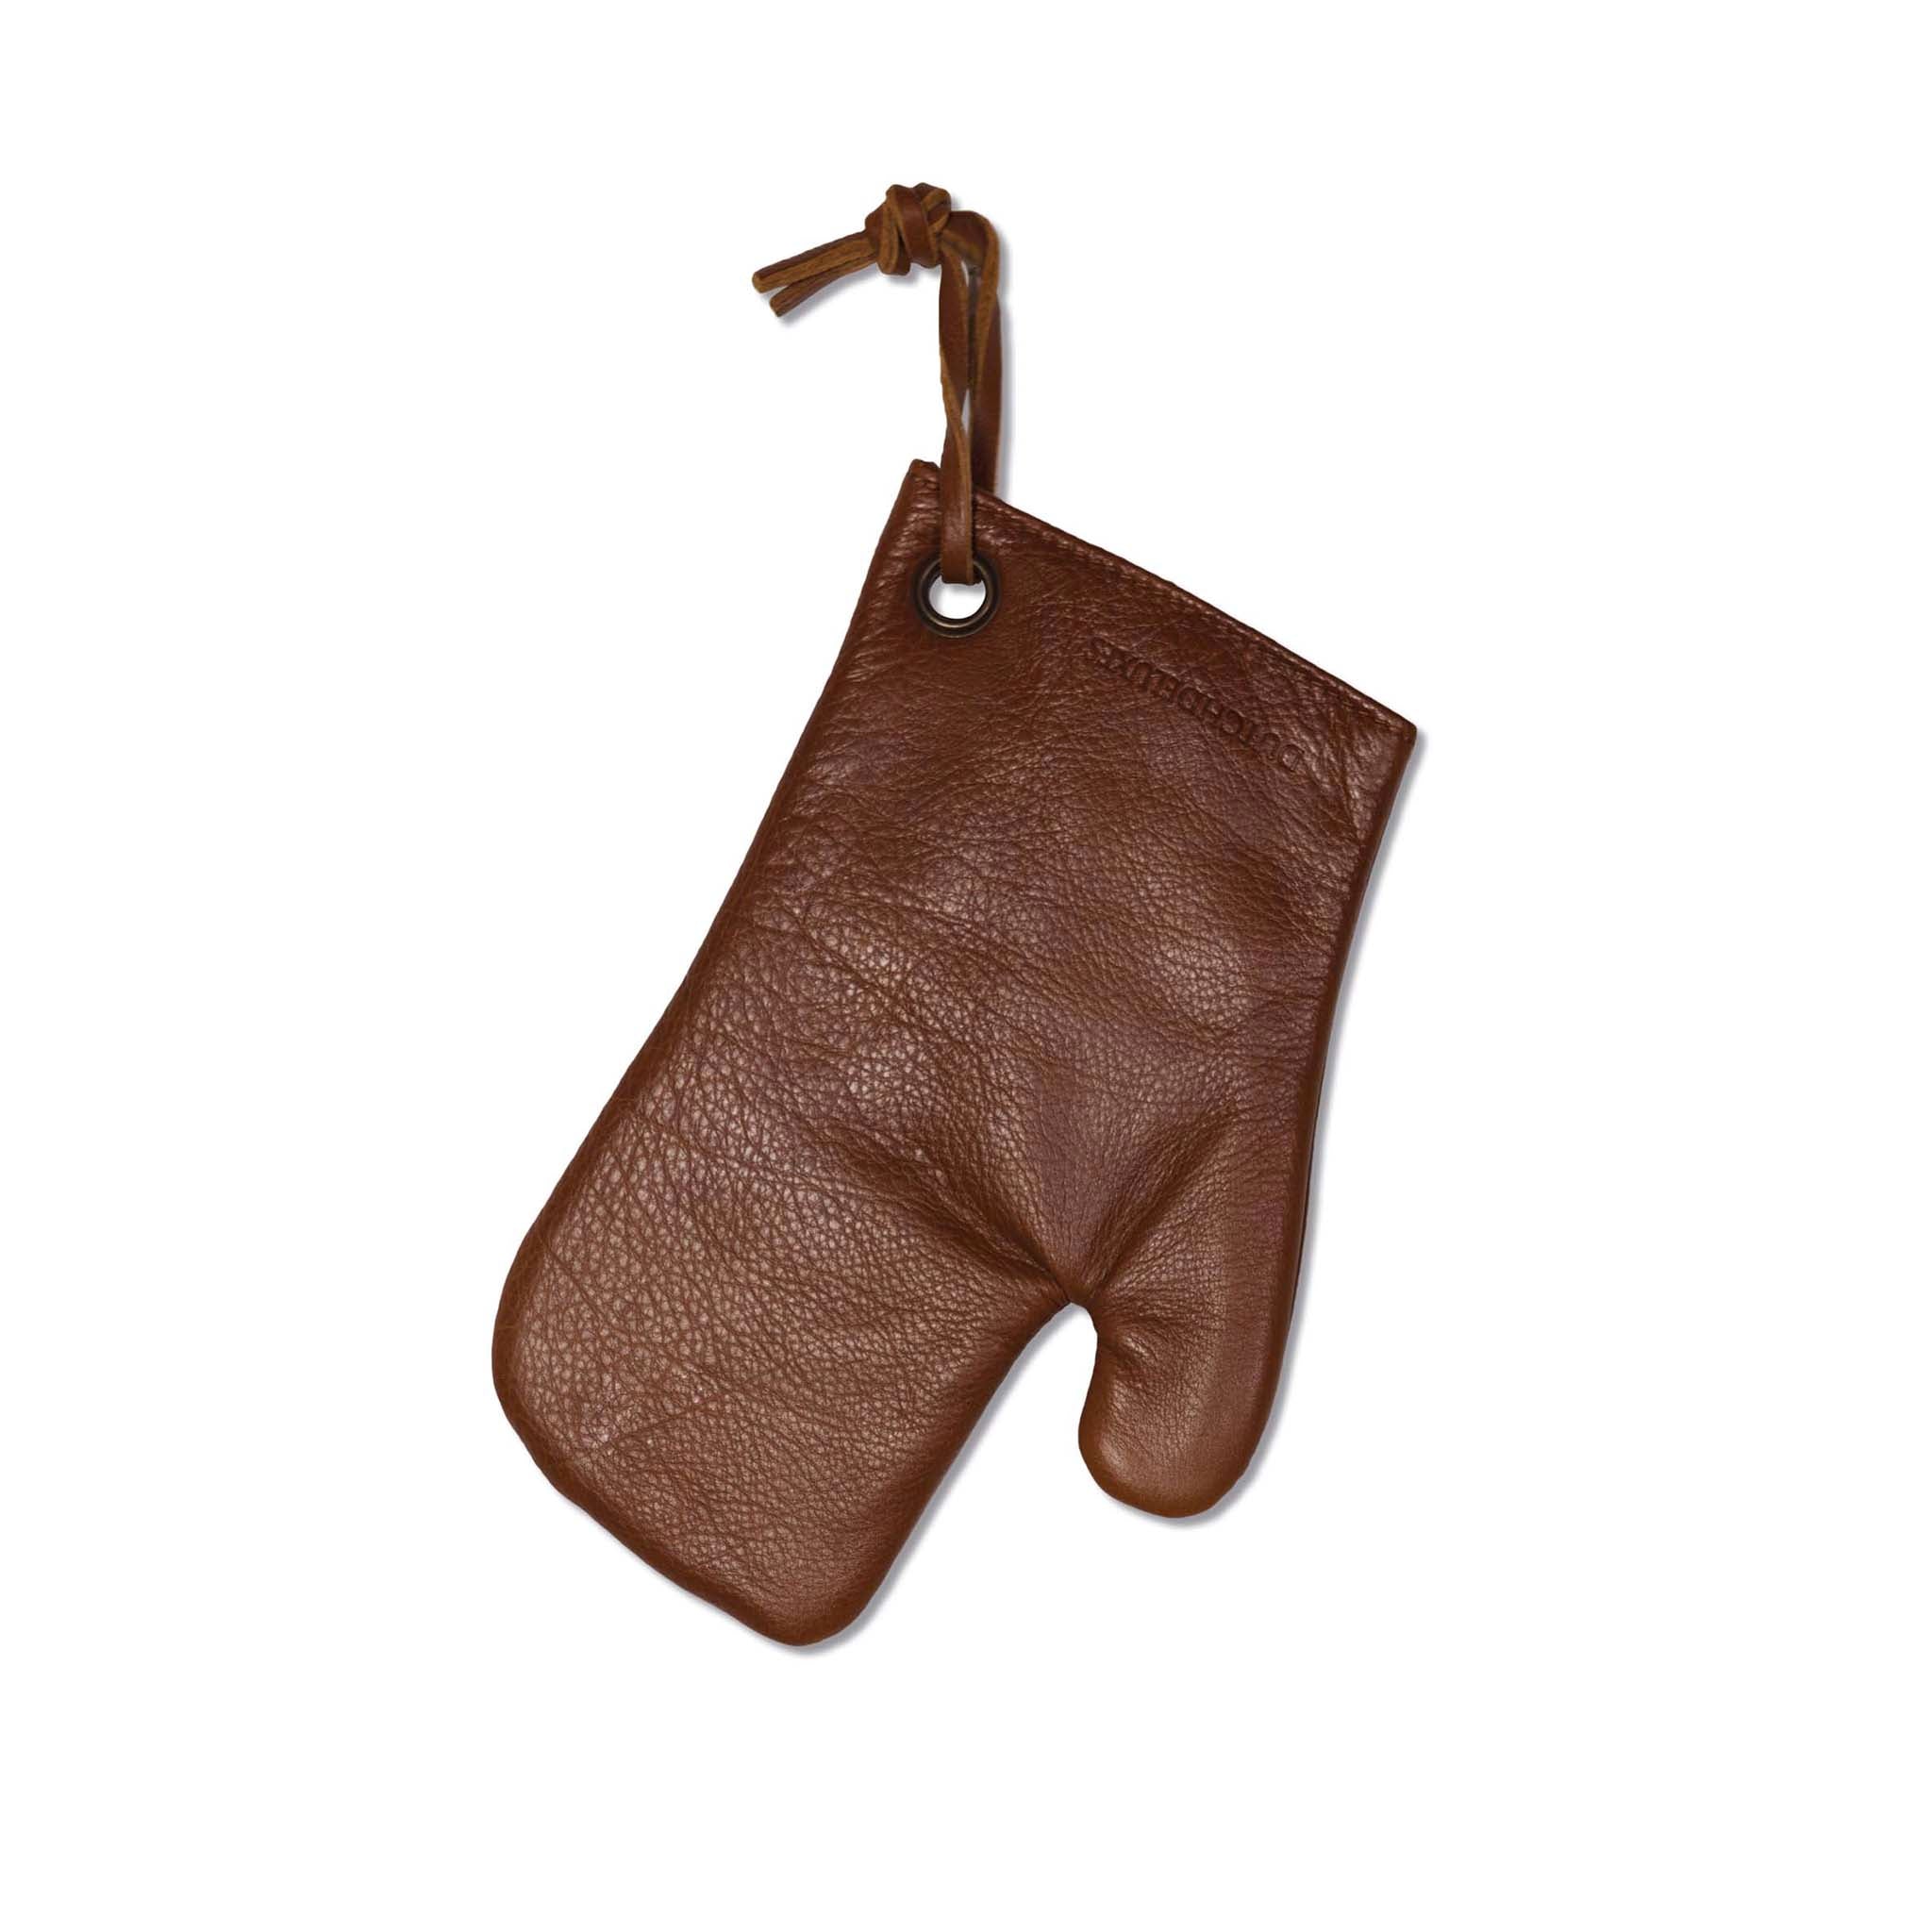 Dutchdeluxes Classic Oven Glove in Classic Brown Cookware Kitchen Clothing